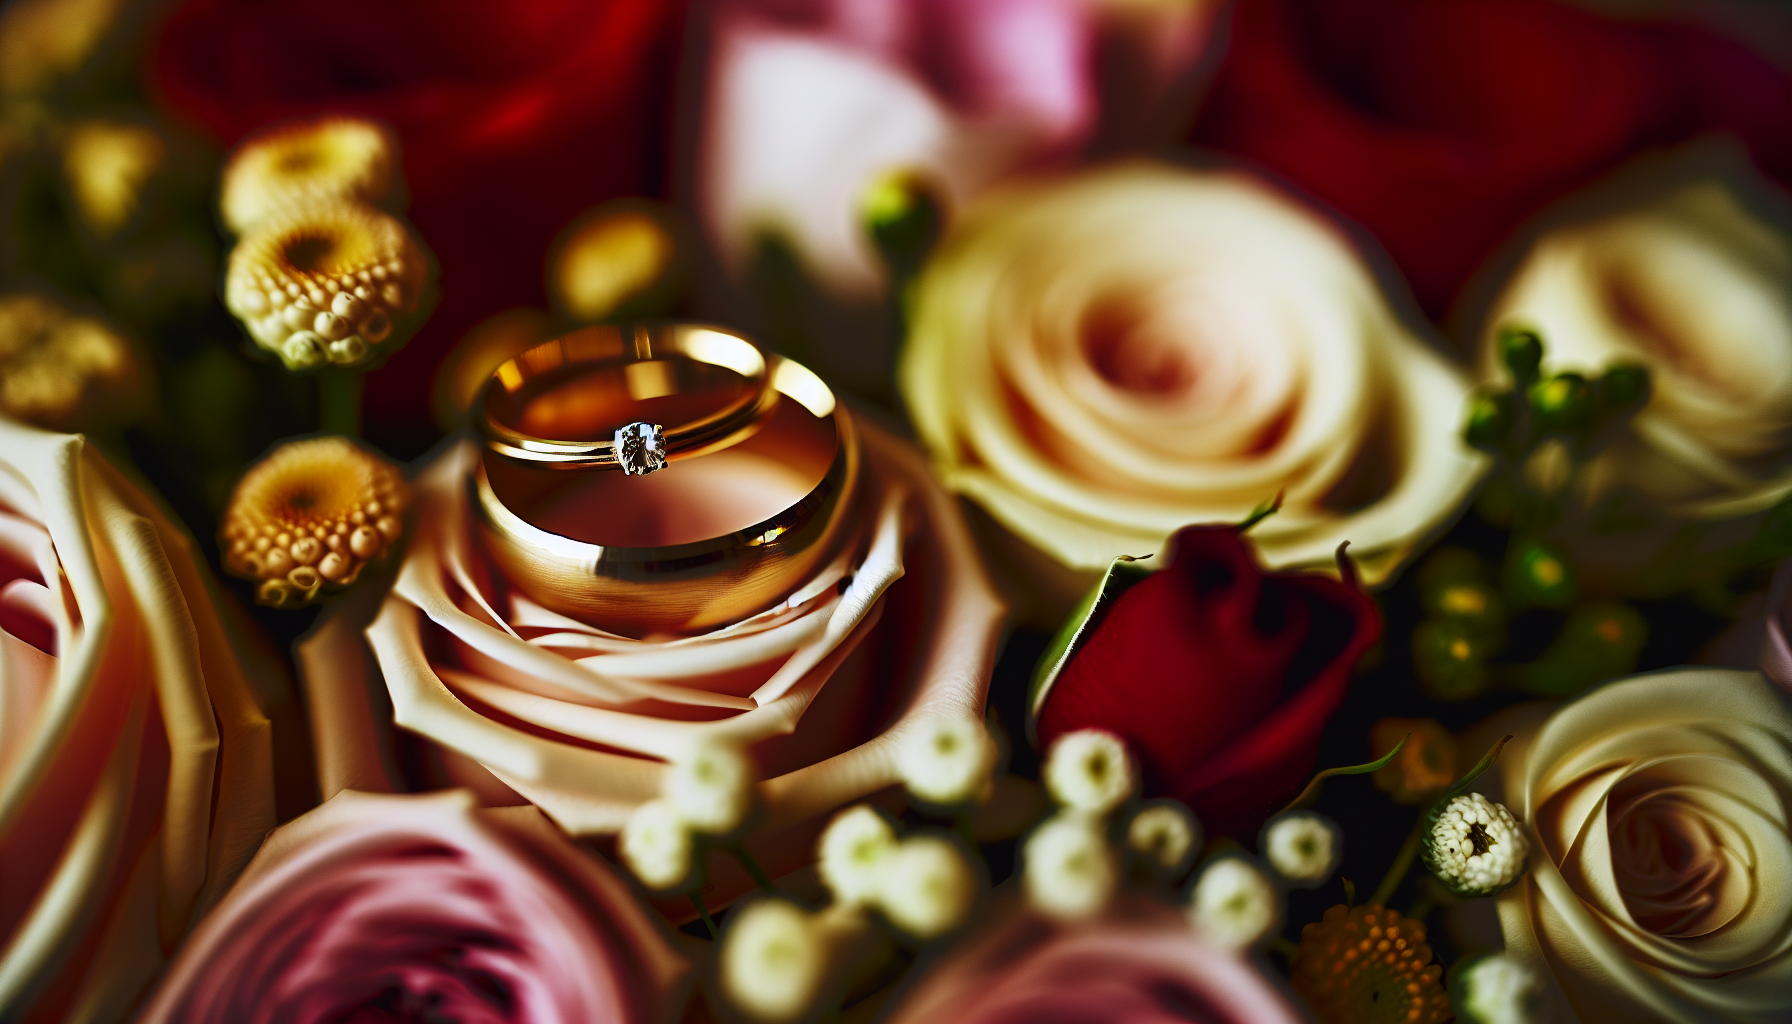 Wedding rings and flowers on a table